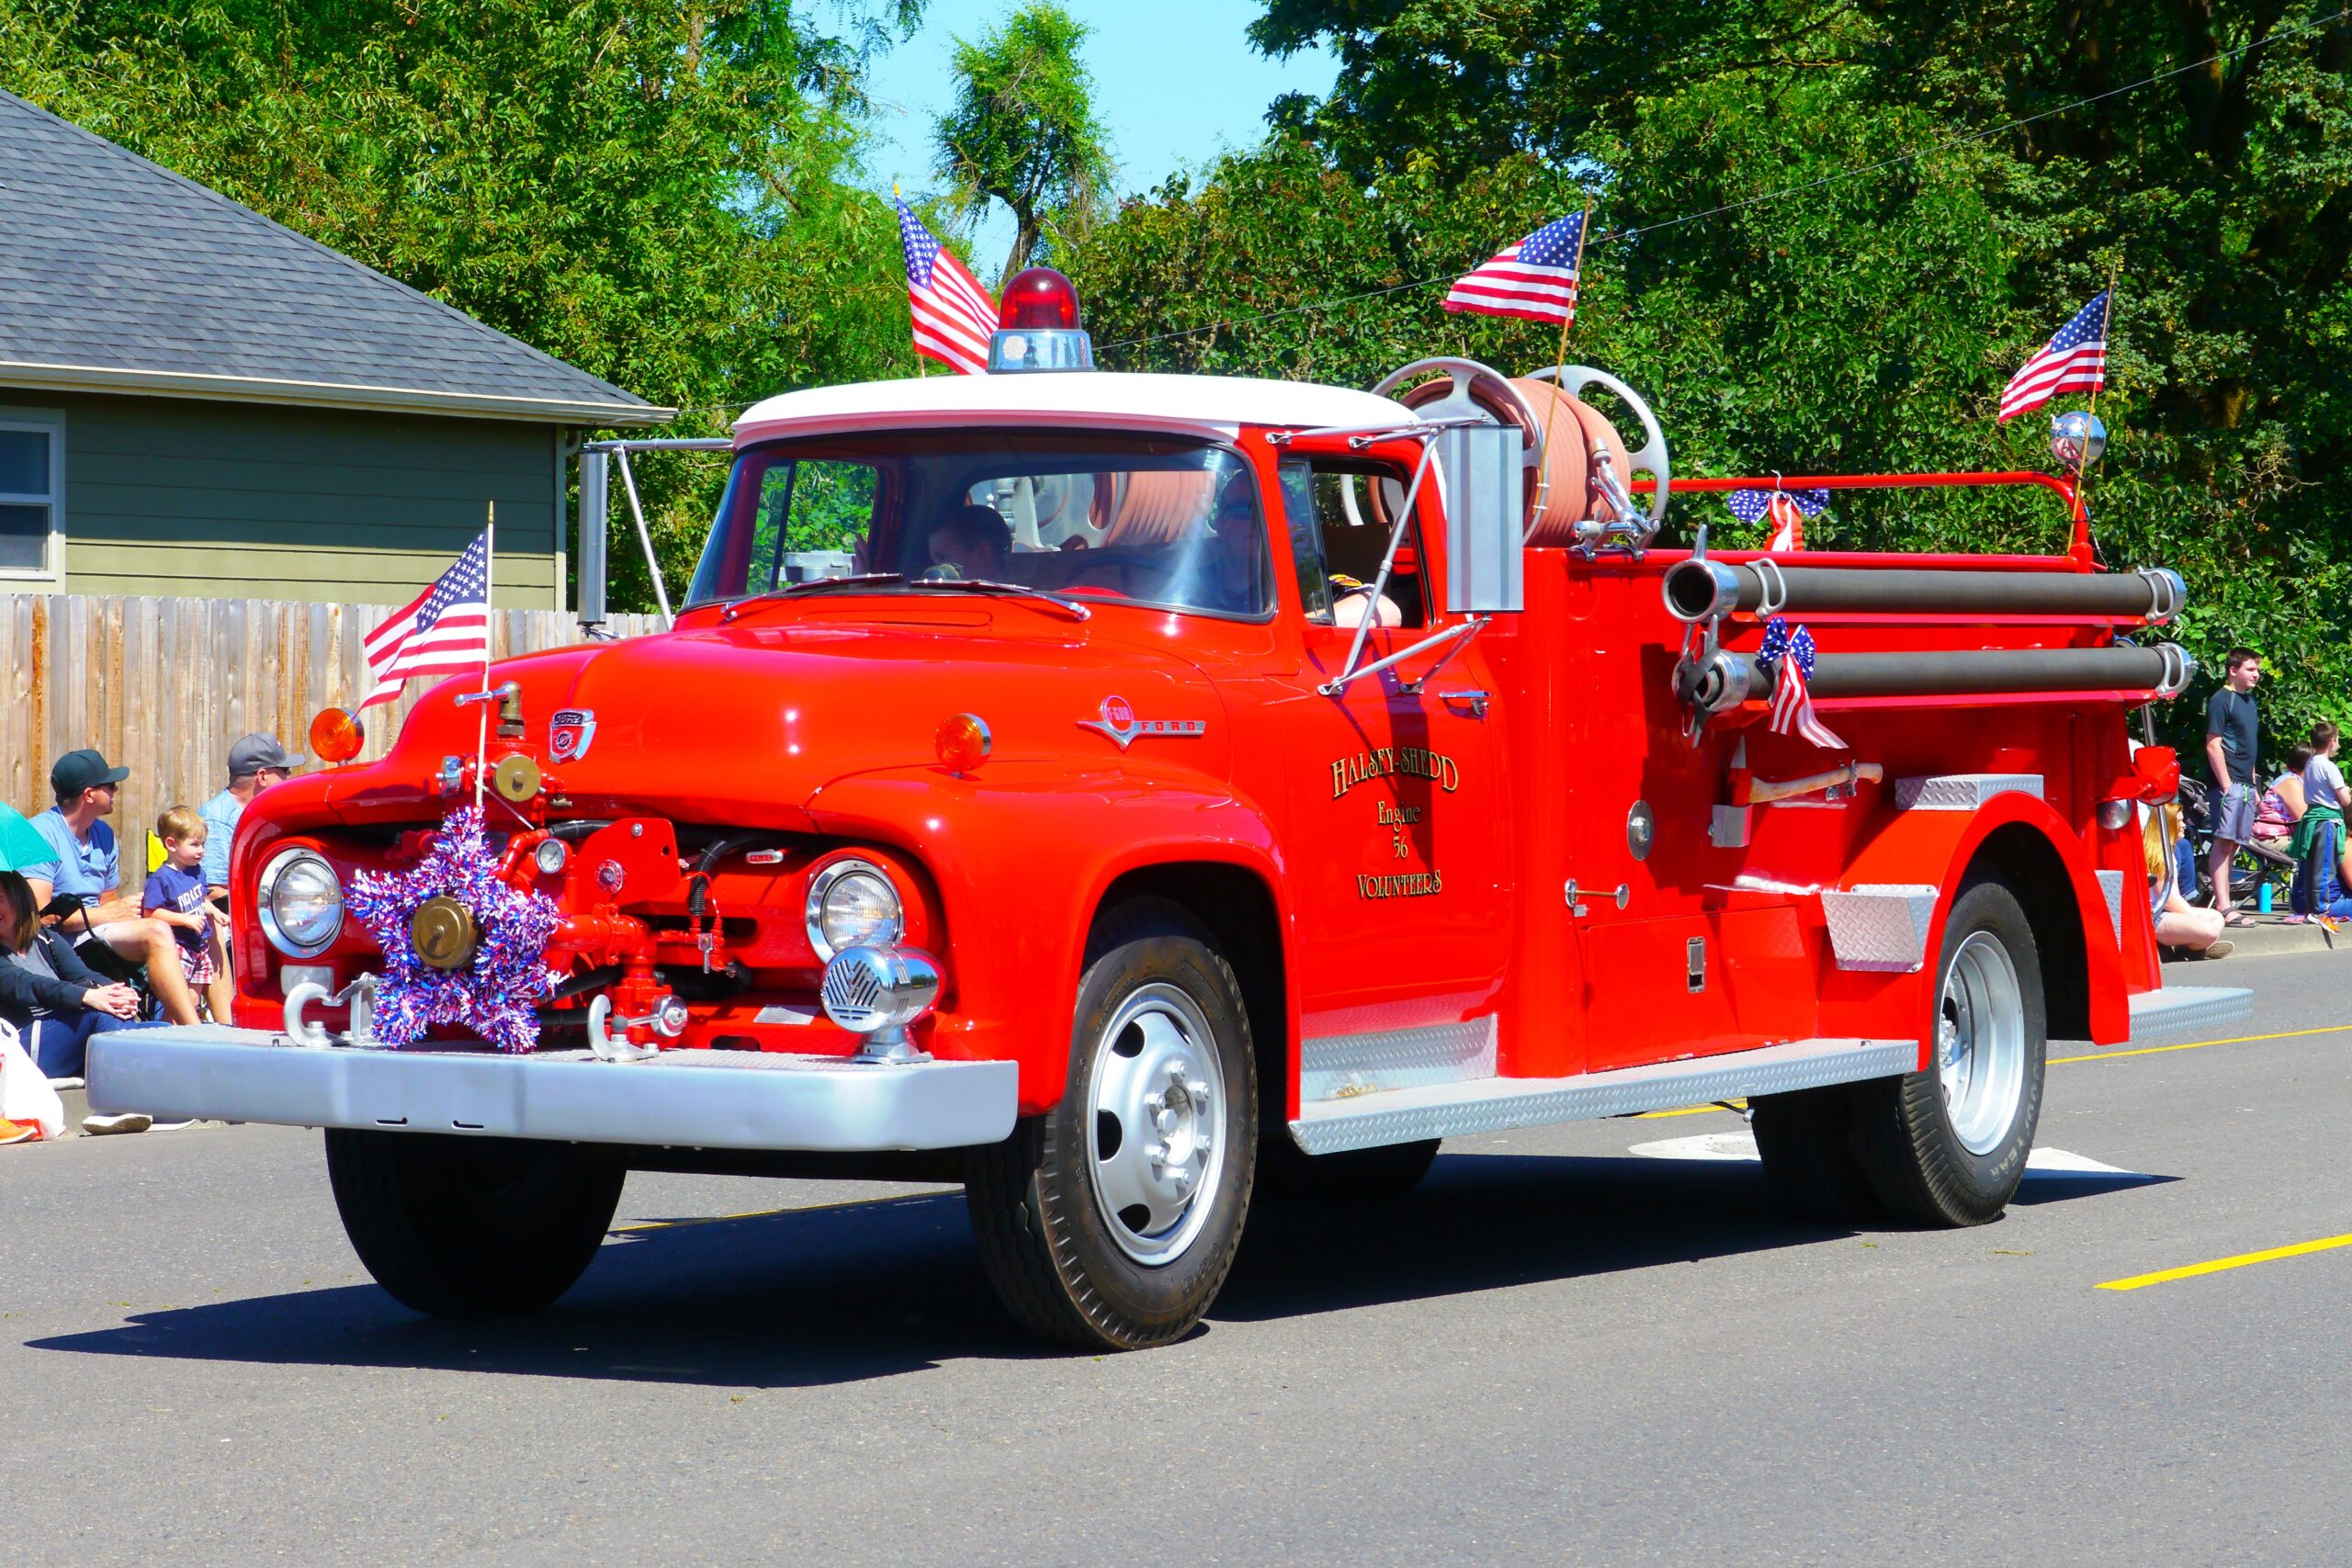 How To Decorate Your Car For A Fourth of July Parade